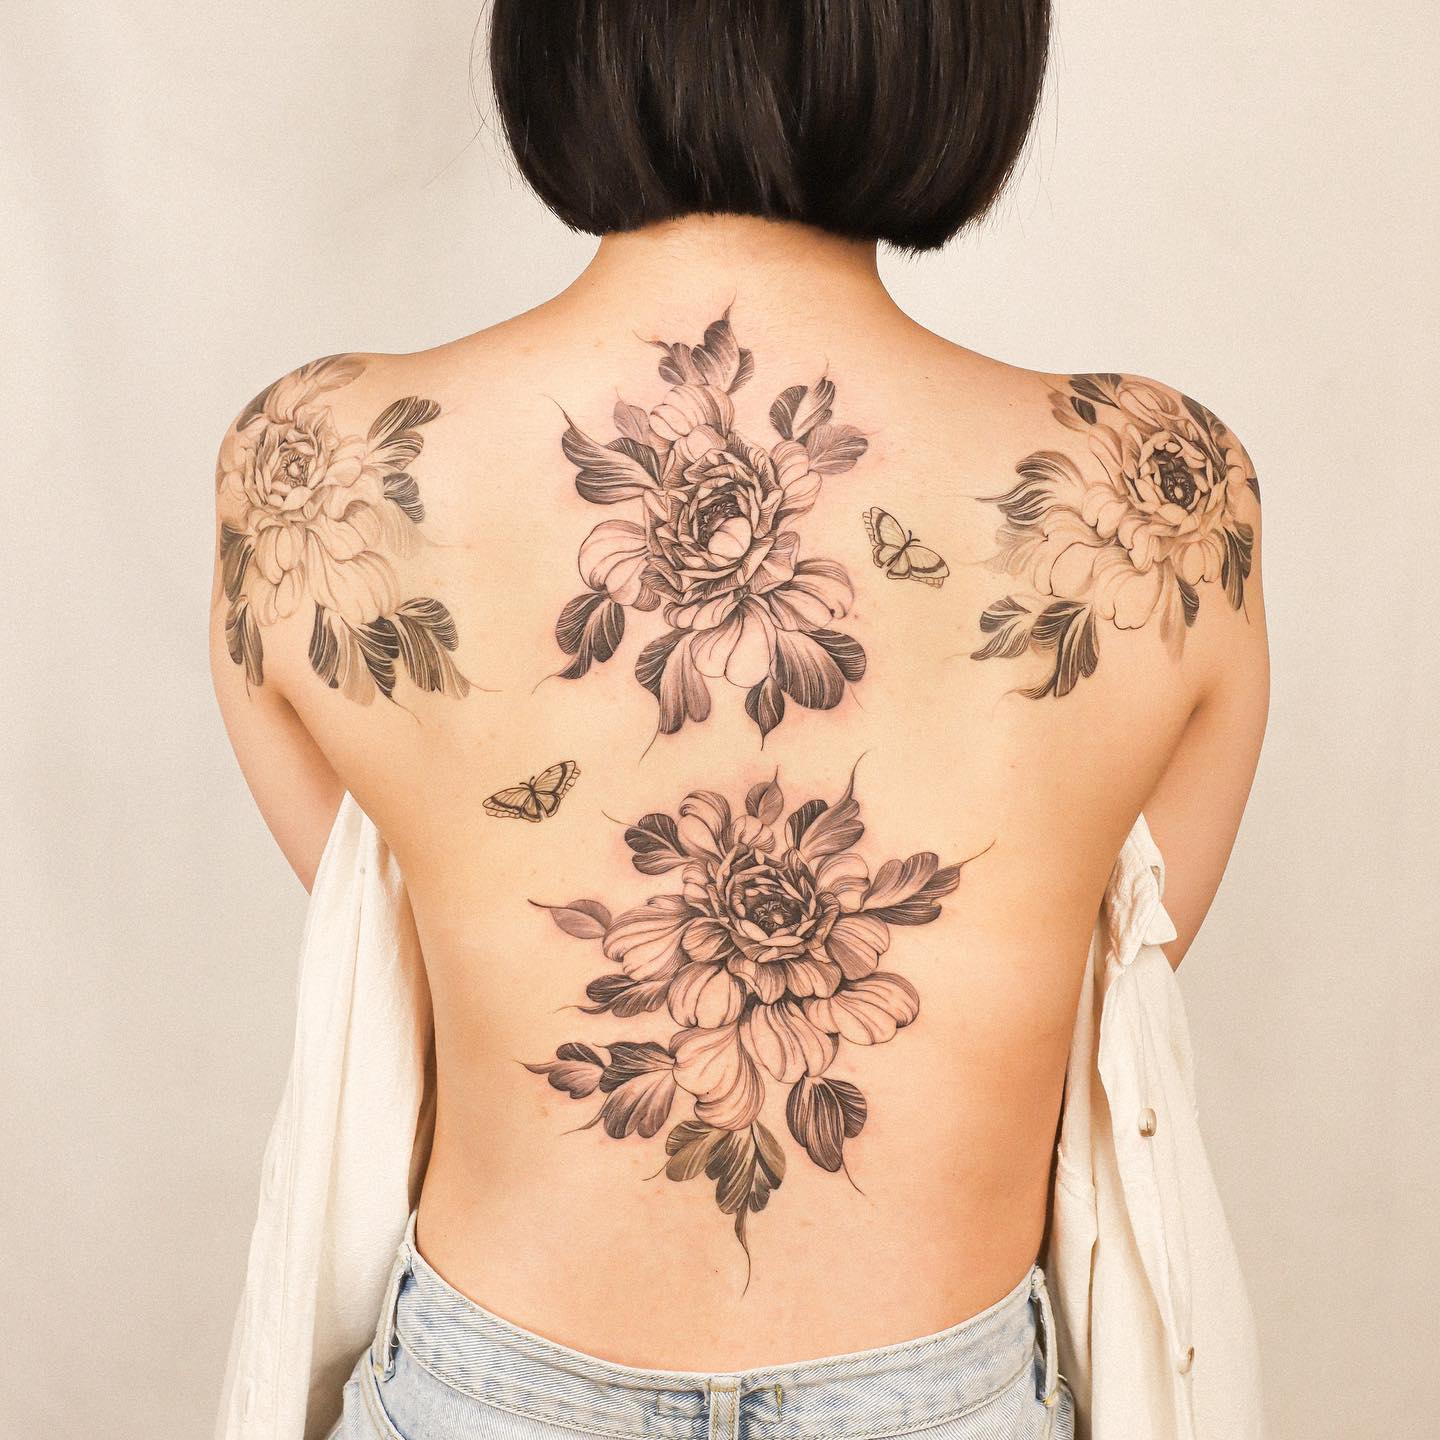 Black and White Peony Flower Tattoo on Back